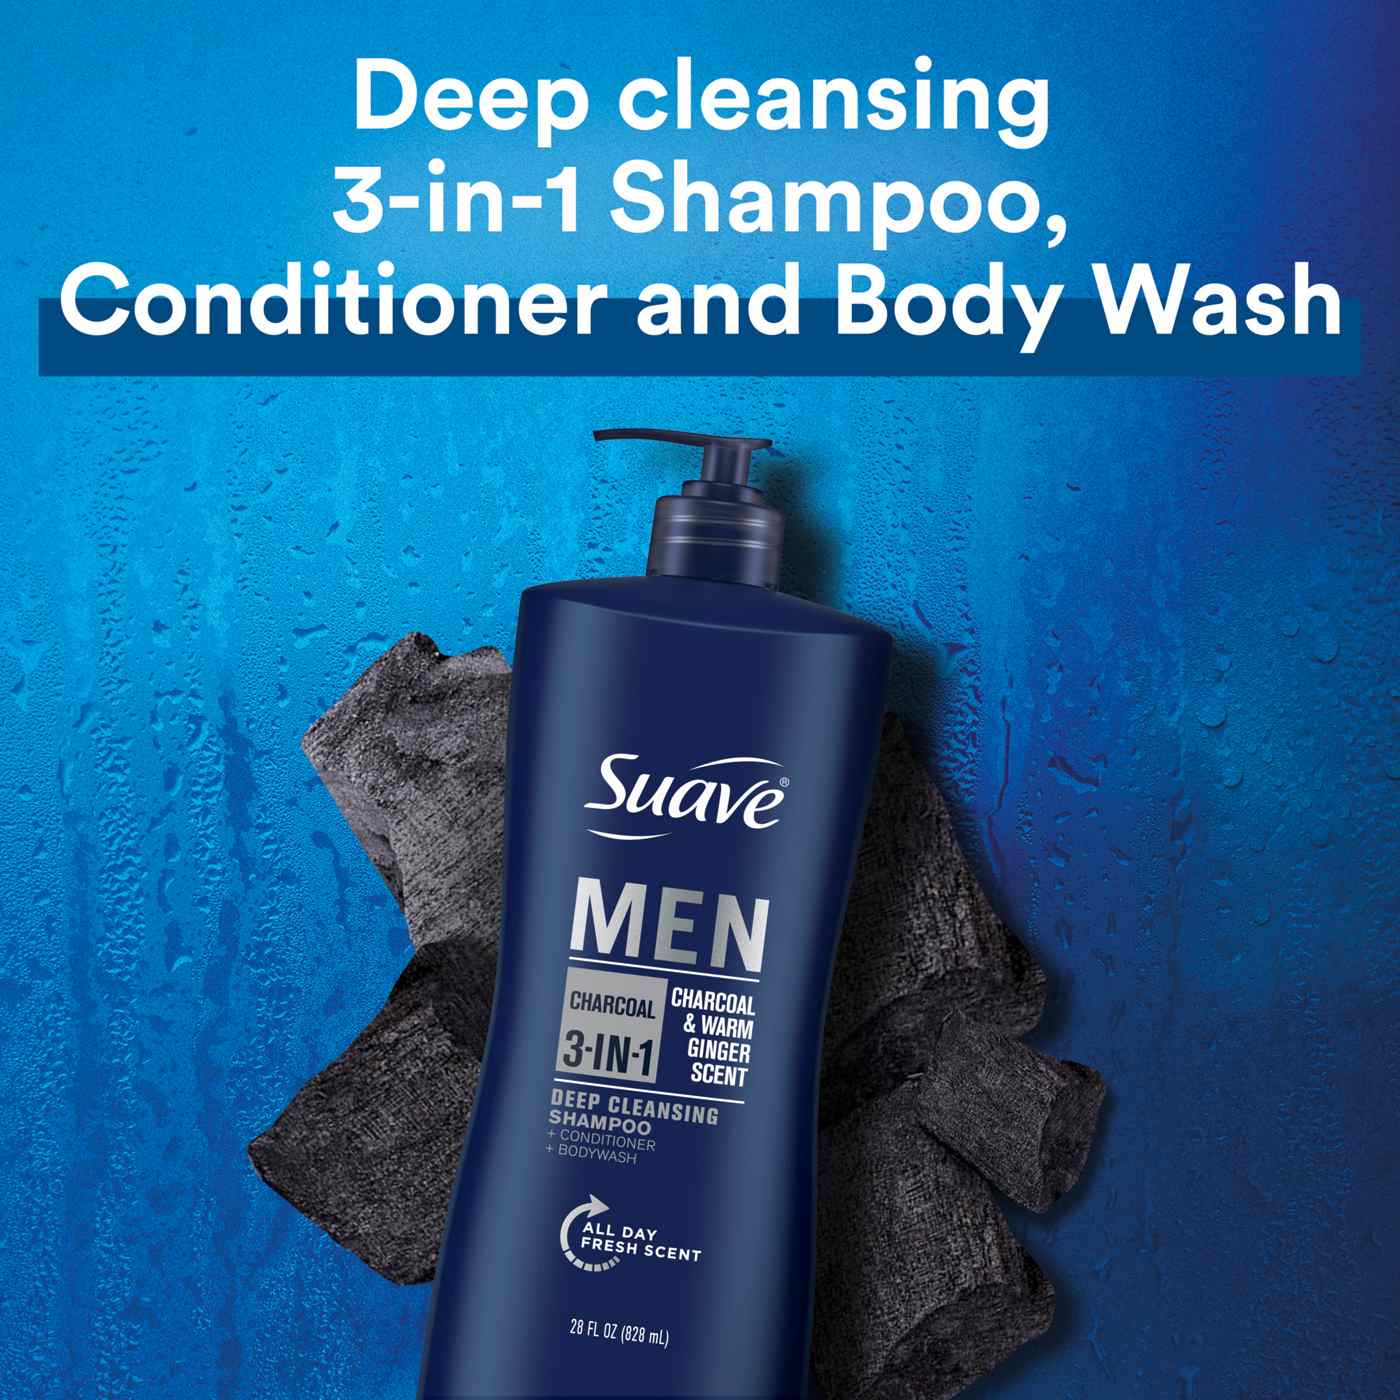 Suave Men 3-in-1 Shampoo Conditioner and Body Wash Infused with Charcoal; image 6 of 12